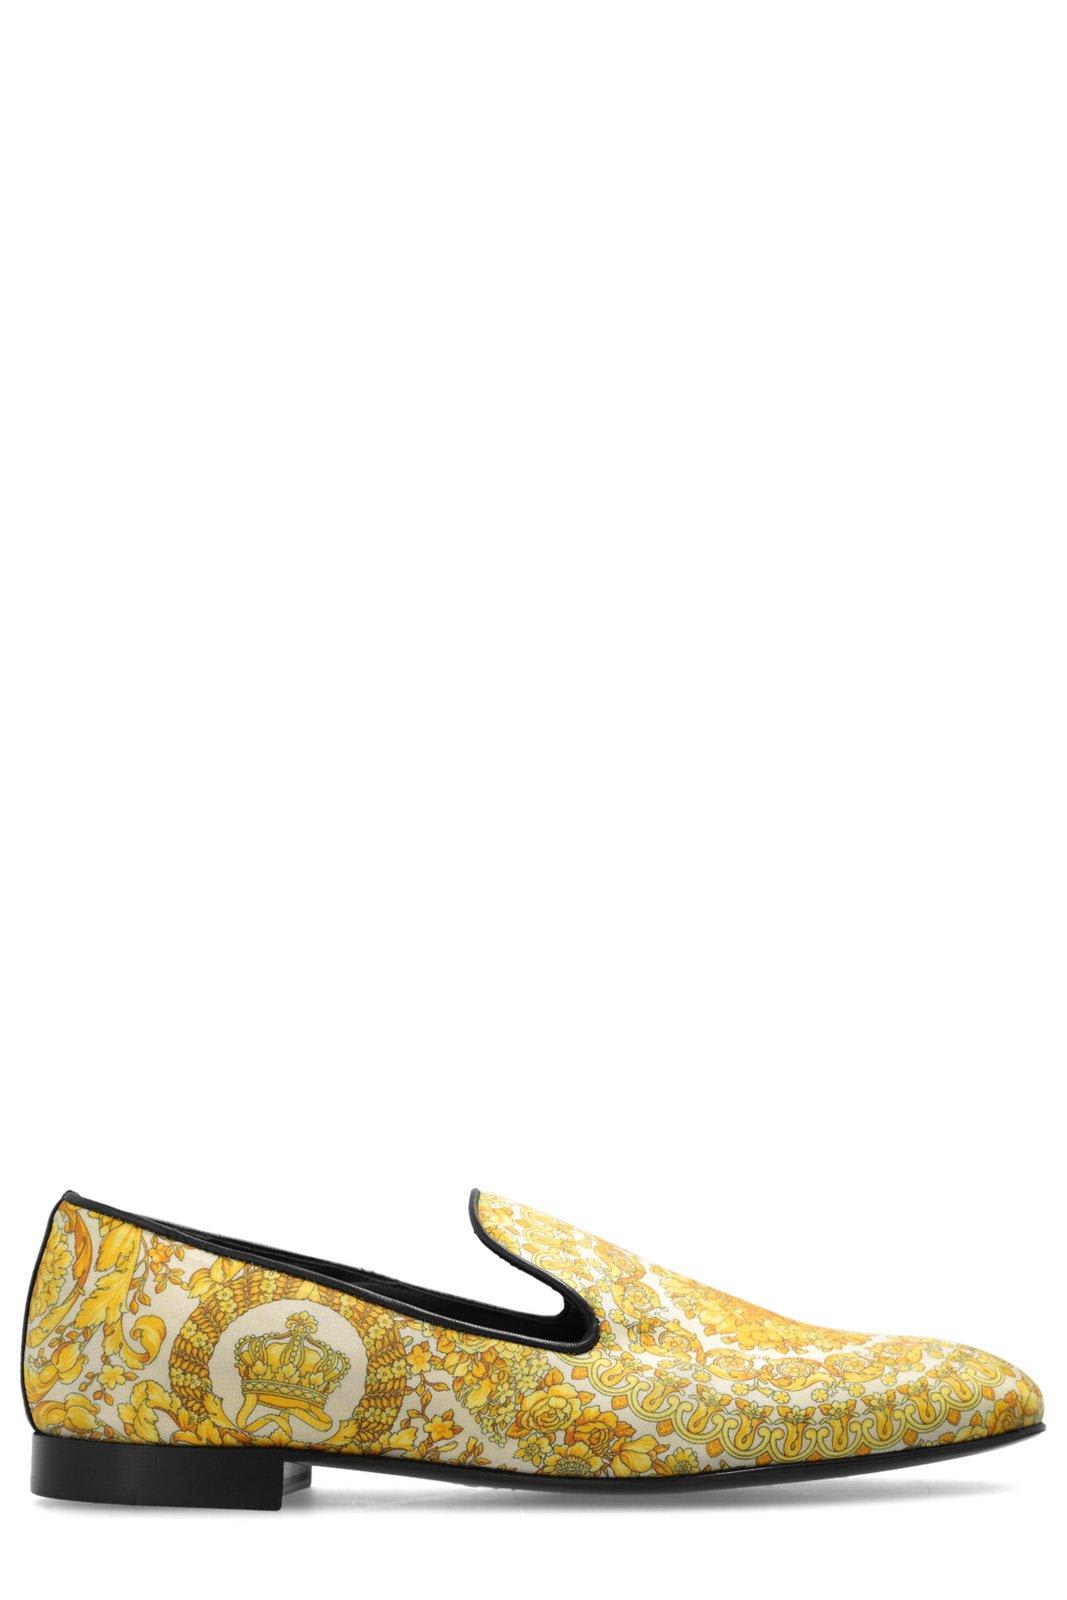 VERSACE BAROCCO PRINTED SLIP-ON LOAFERS